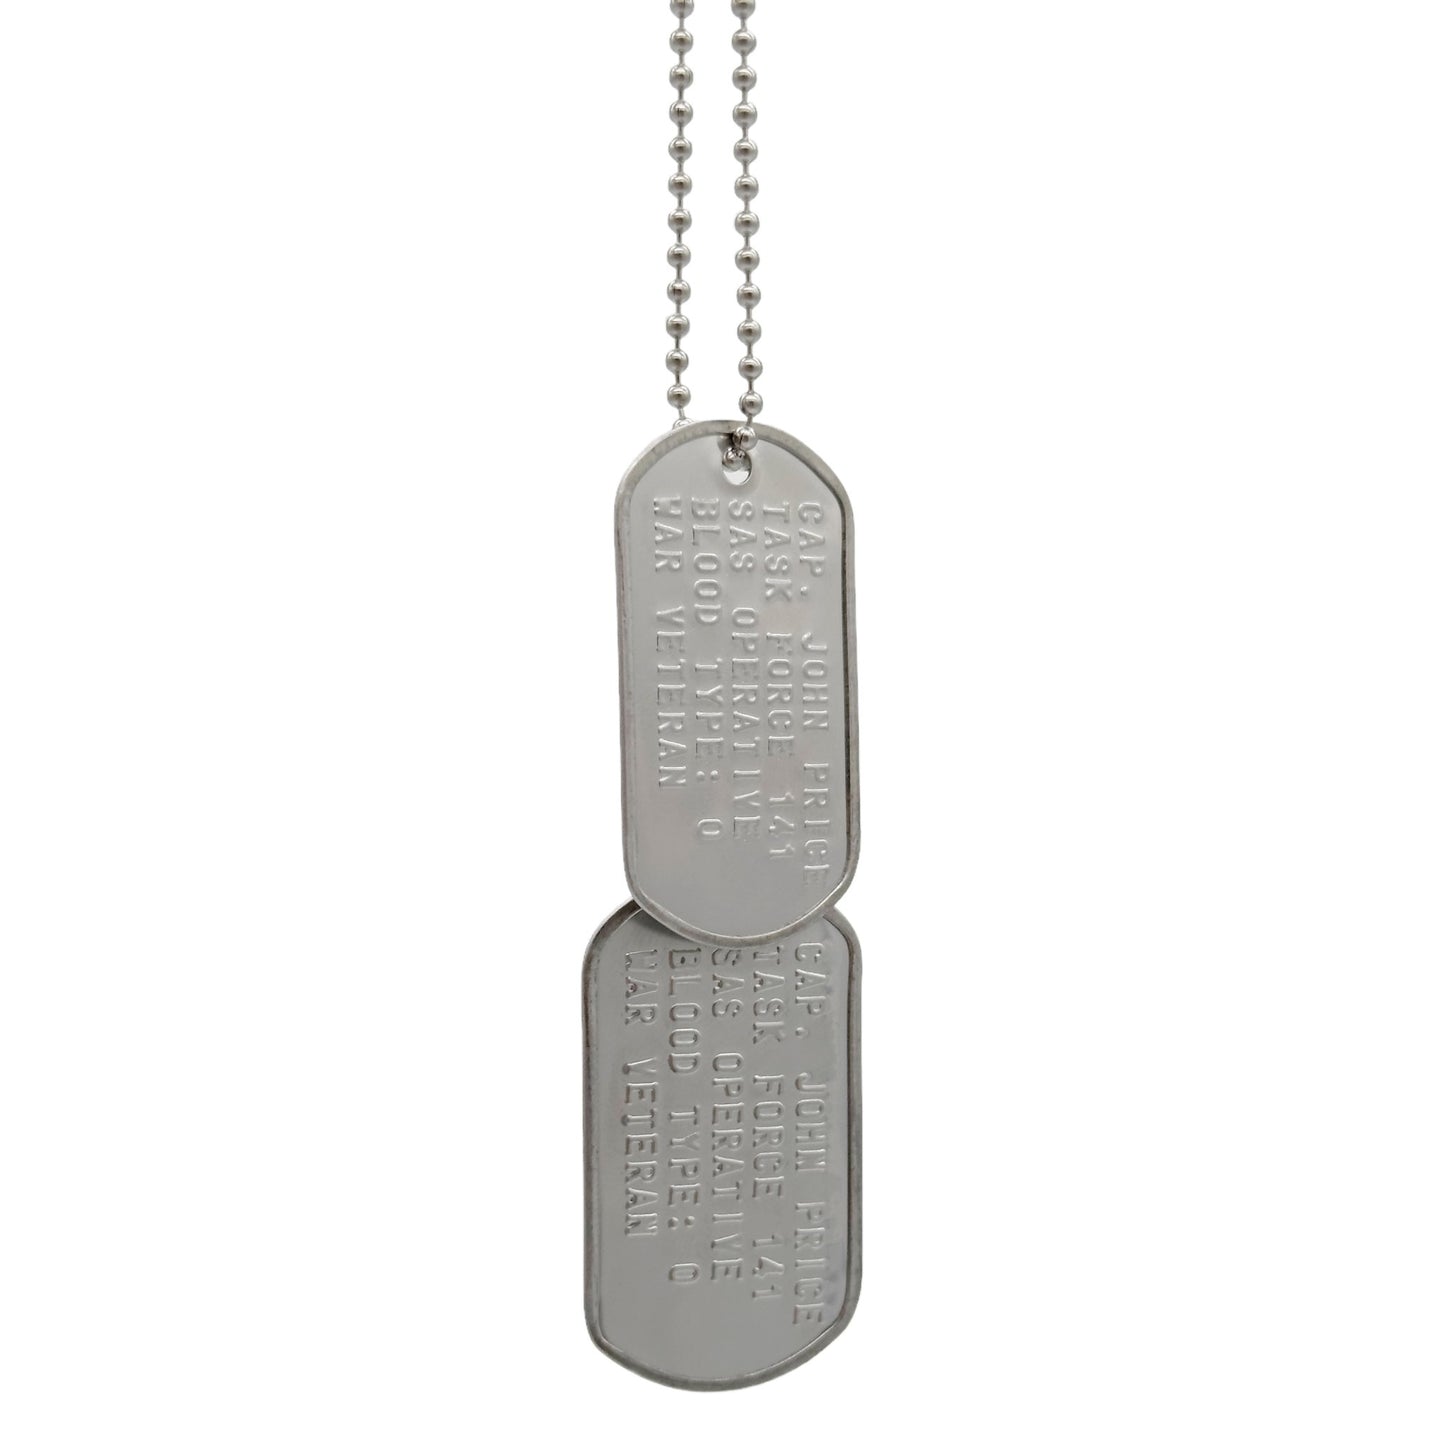 Captain John Price Military Dog Tag Set- Stainless Steel - Chains Included - TheDogTagCo